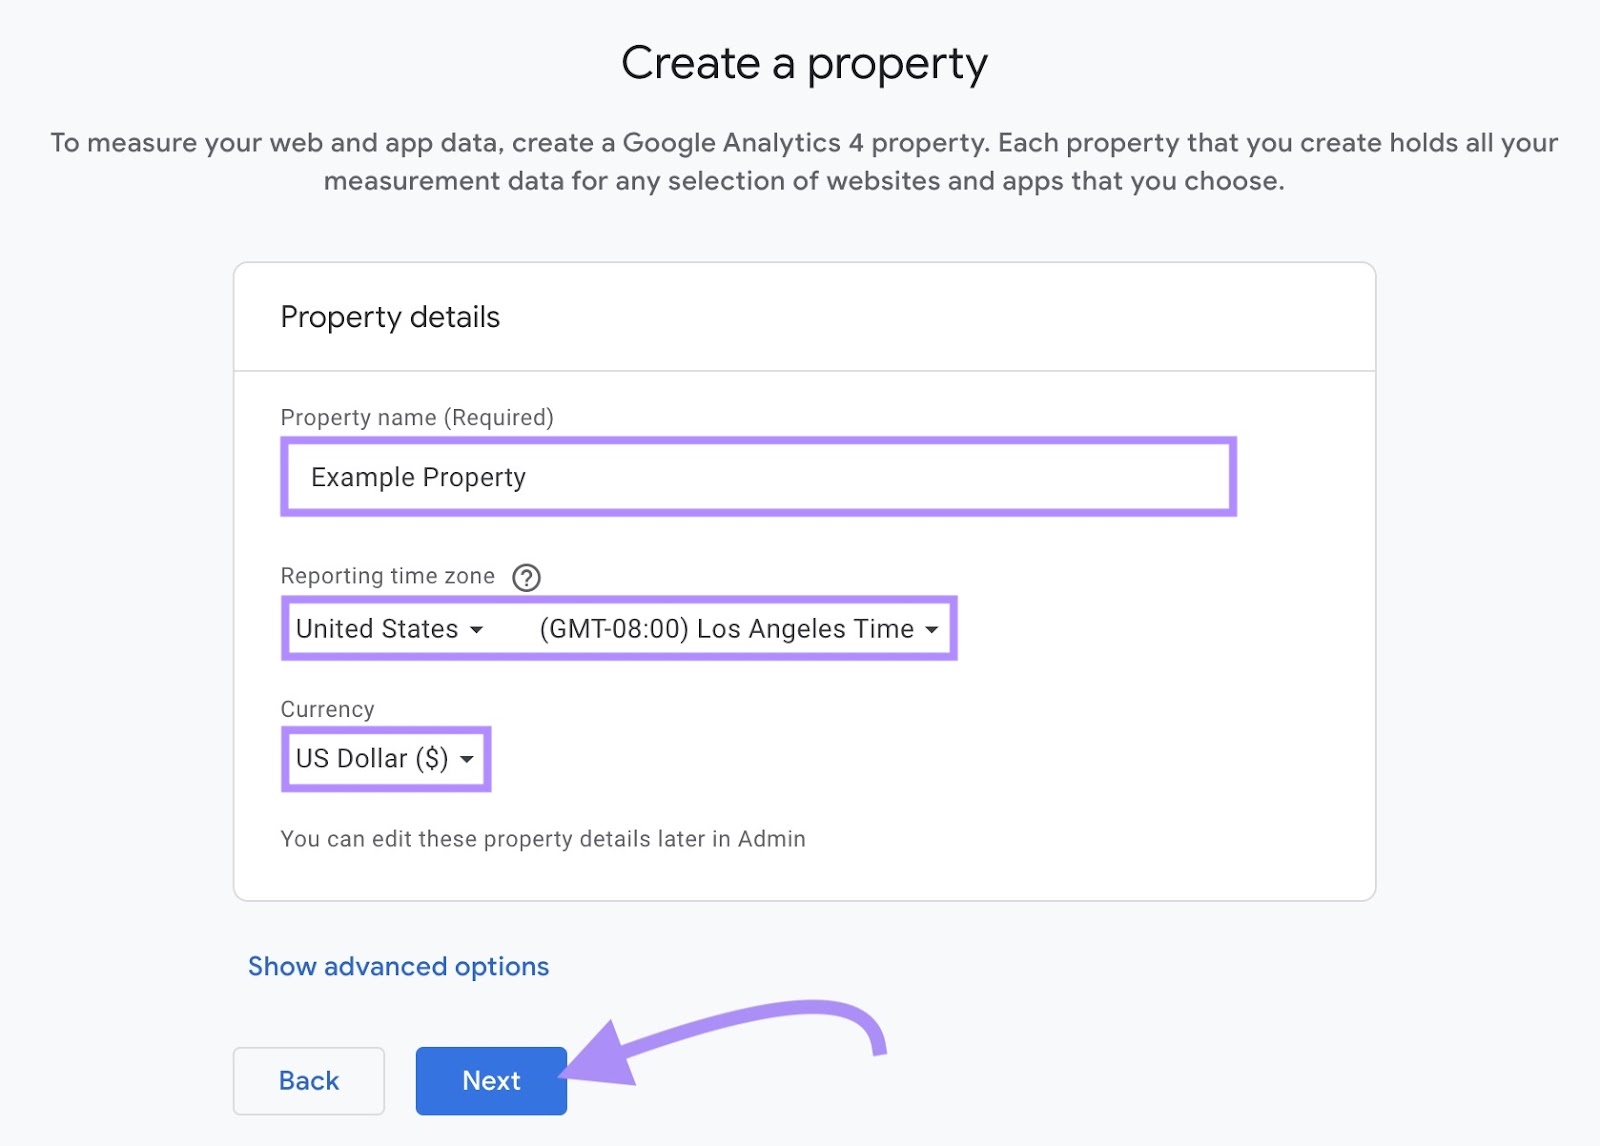 Property name, Reporting time zone, and Currency fields